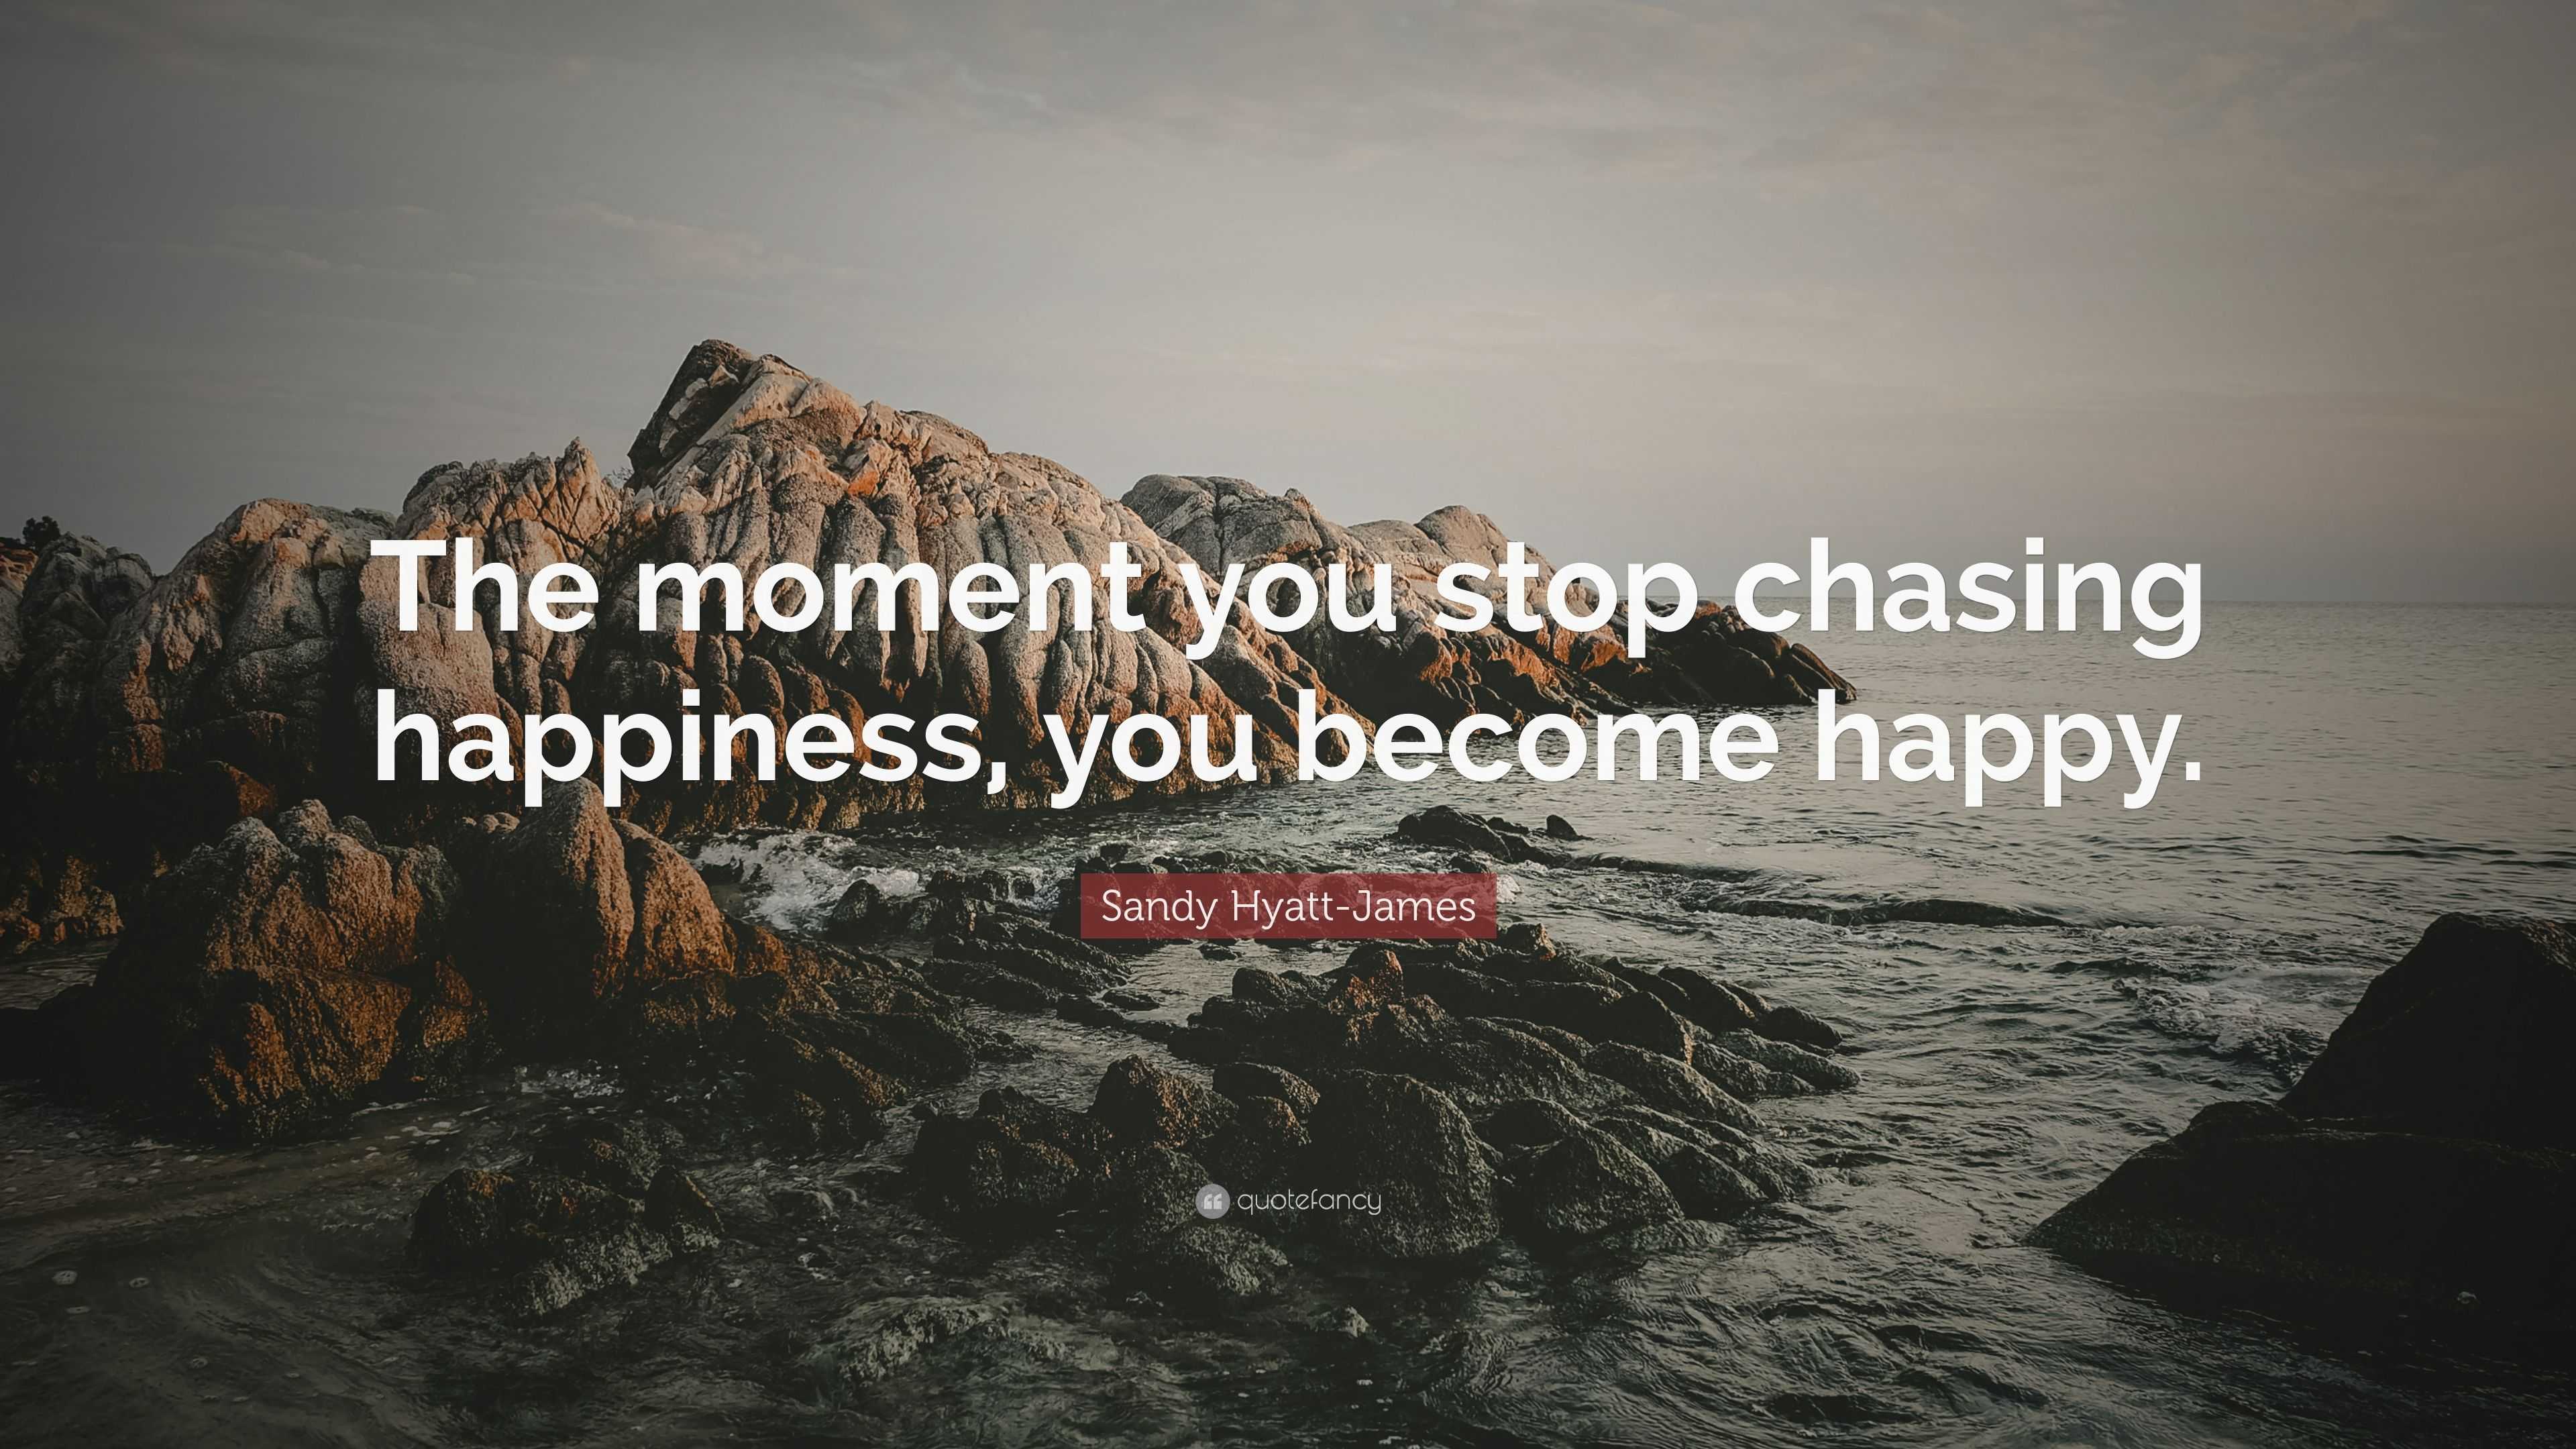 How I Stopped Chasing Happiness and Started Enjoying My Imperfect Life